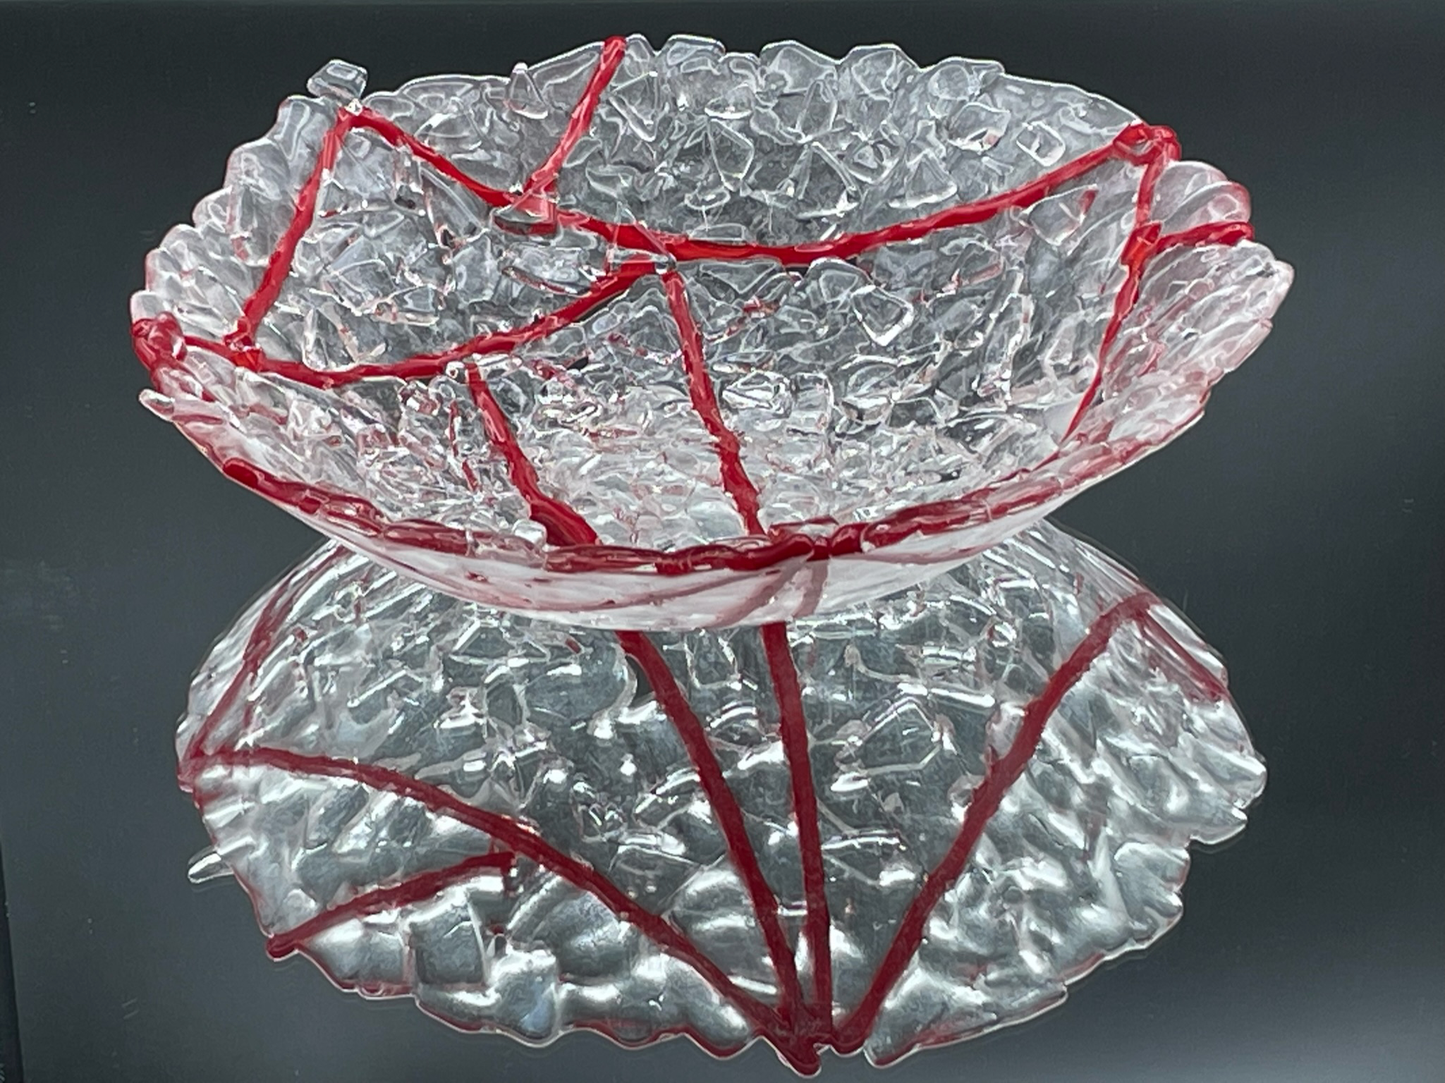 Fractured Bowl with Red accents